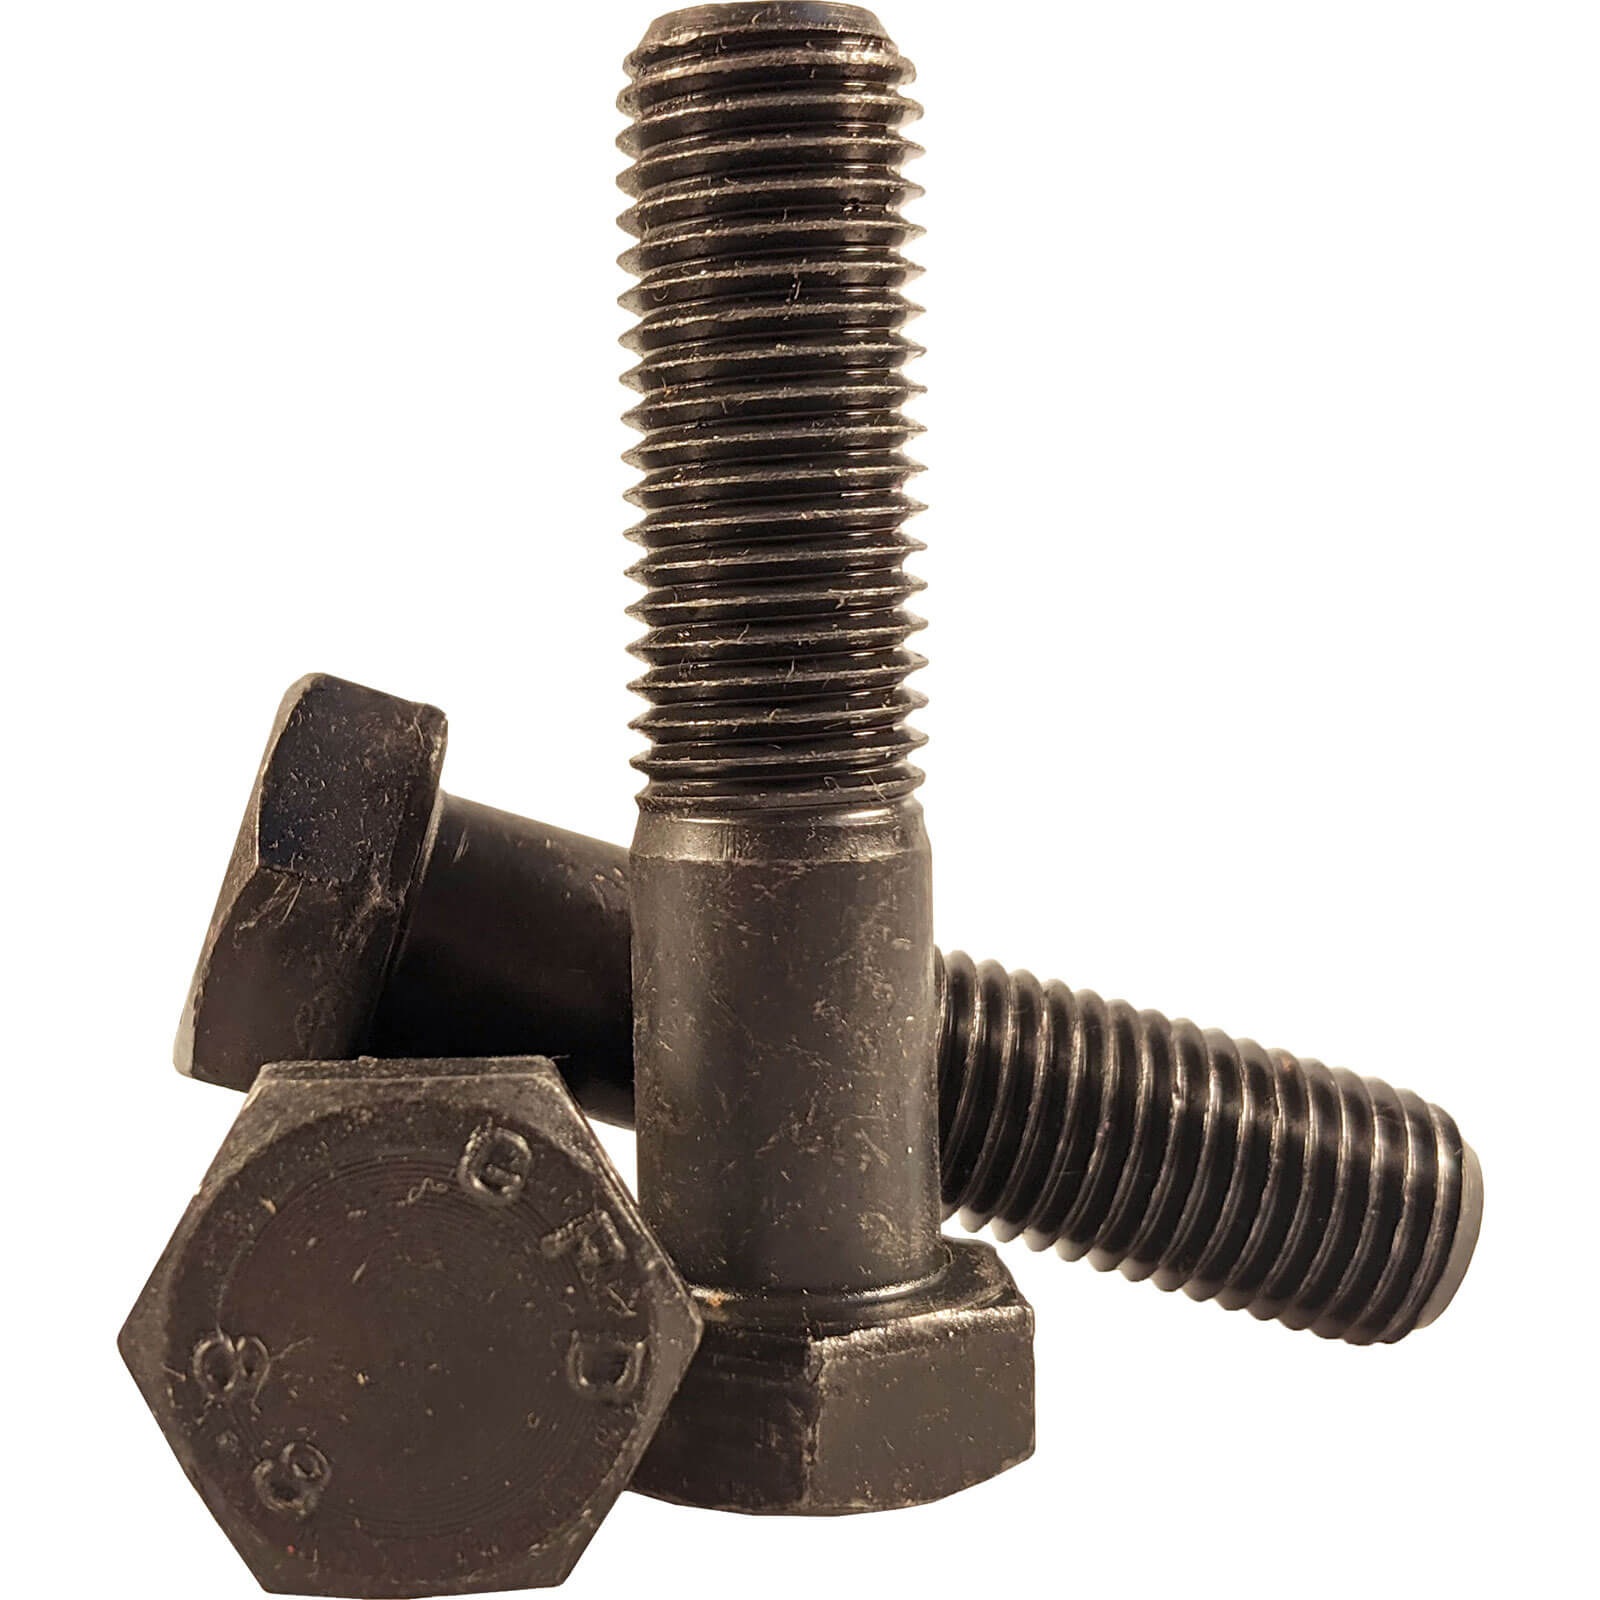 Image of Sirius Bolts High Tensil 8.8 Grade M8 90mm Pack of 1